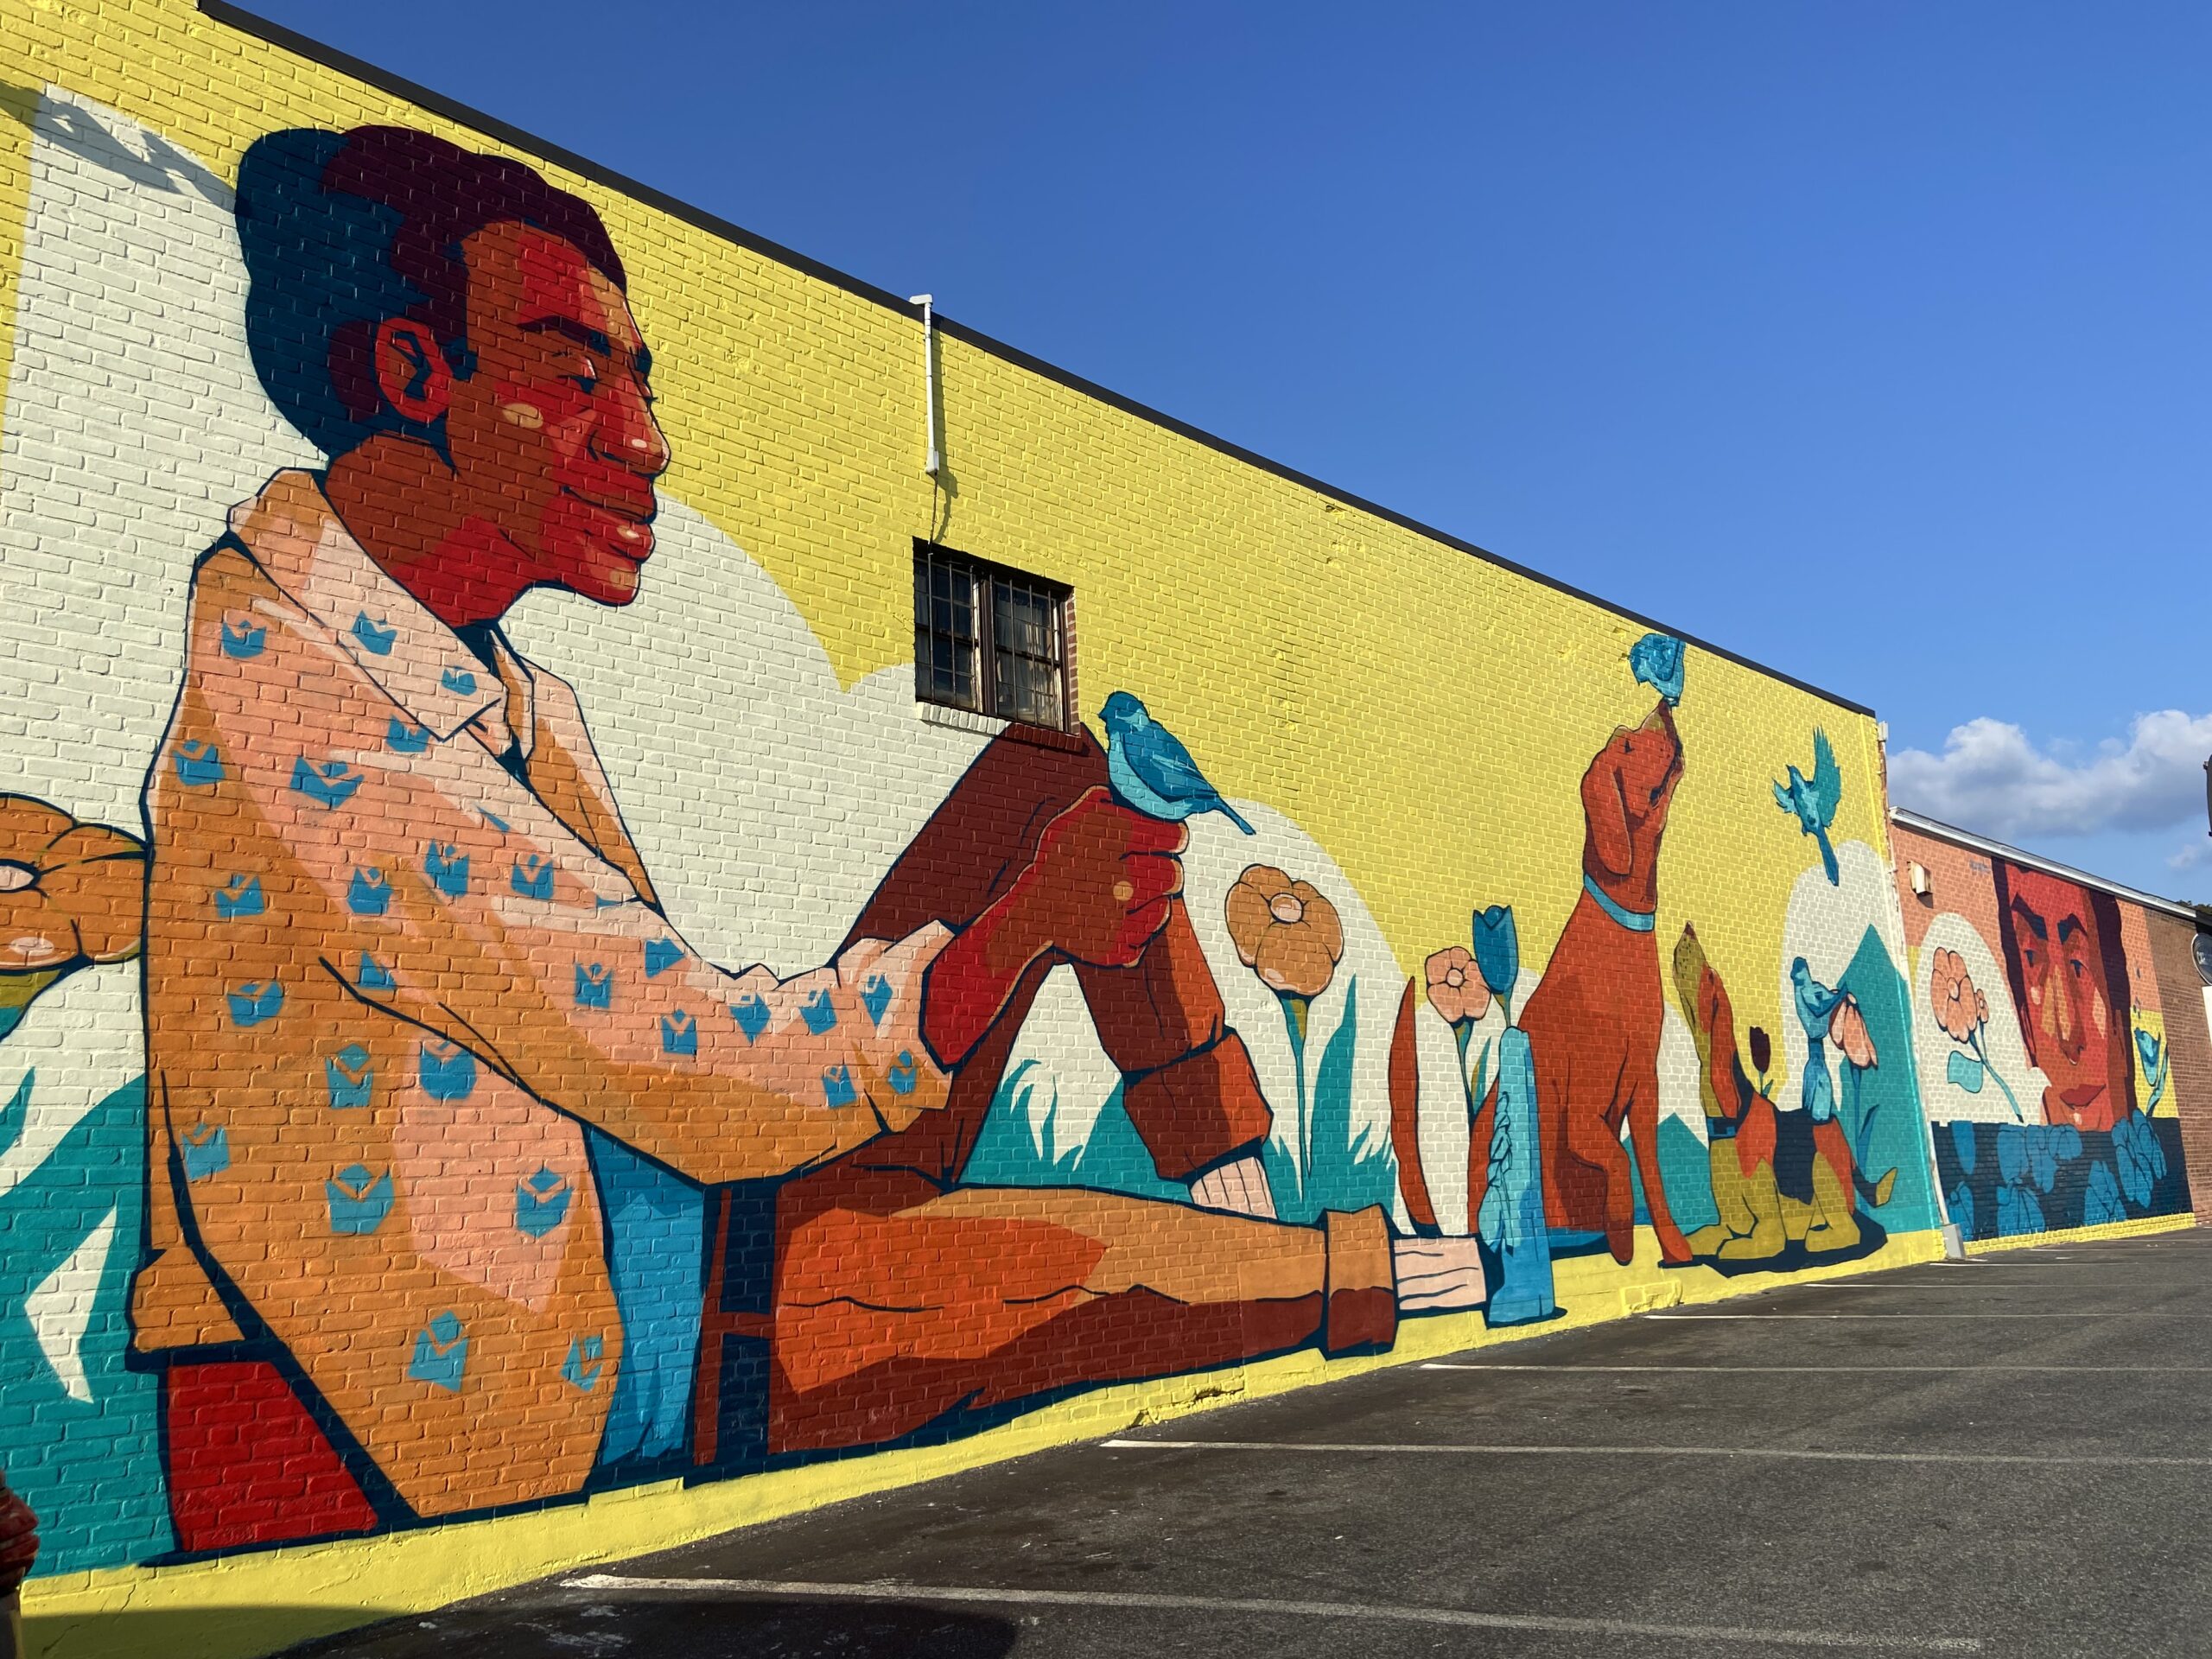 An original mural by qwynto on Carr Hardware at 547 North Street